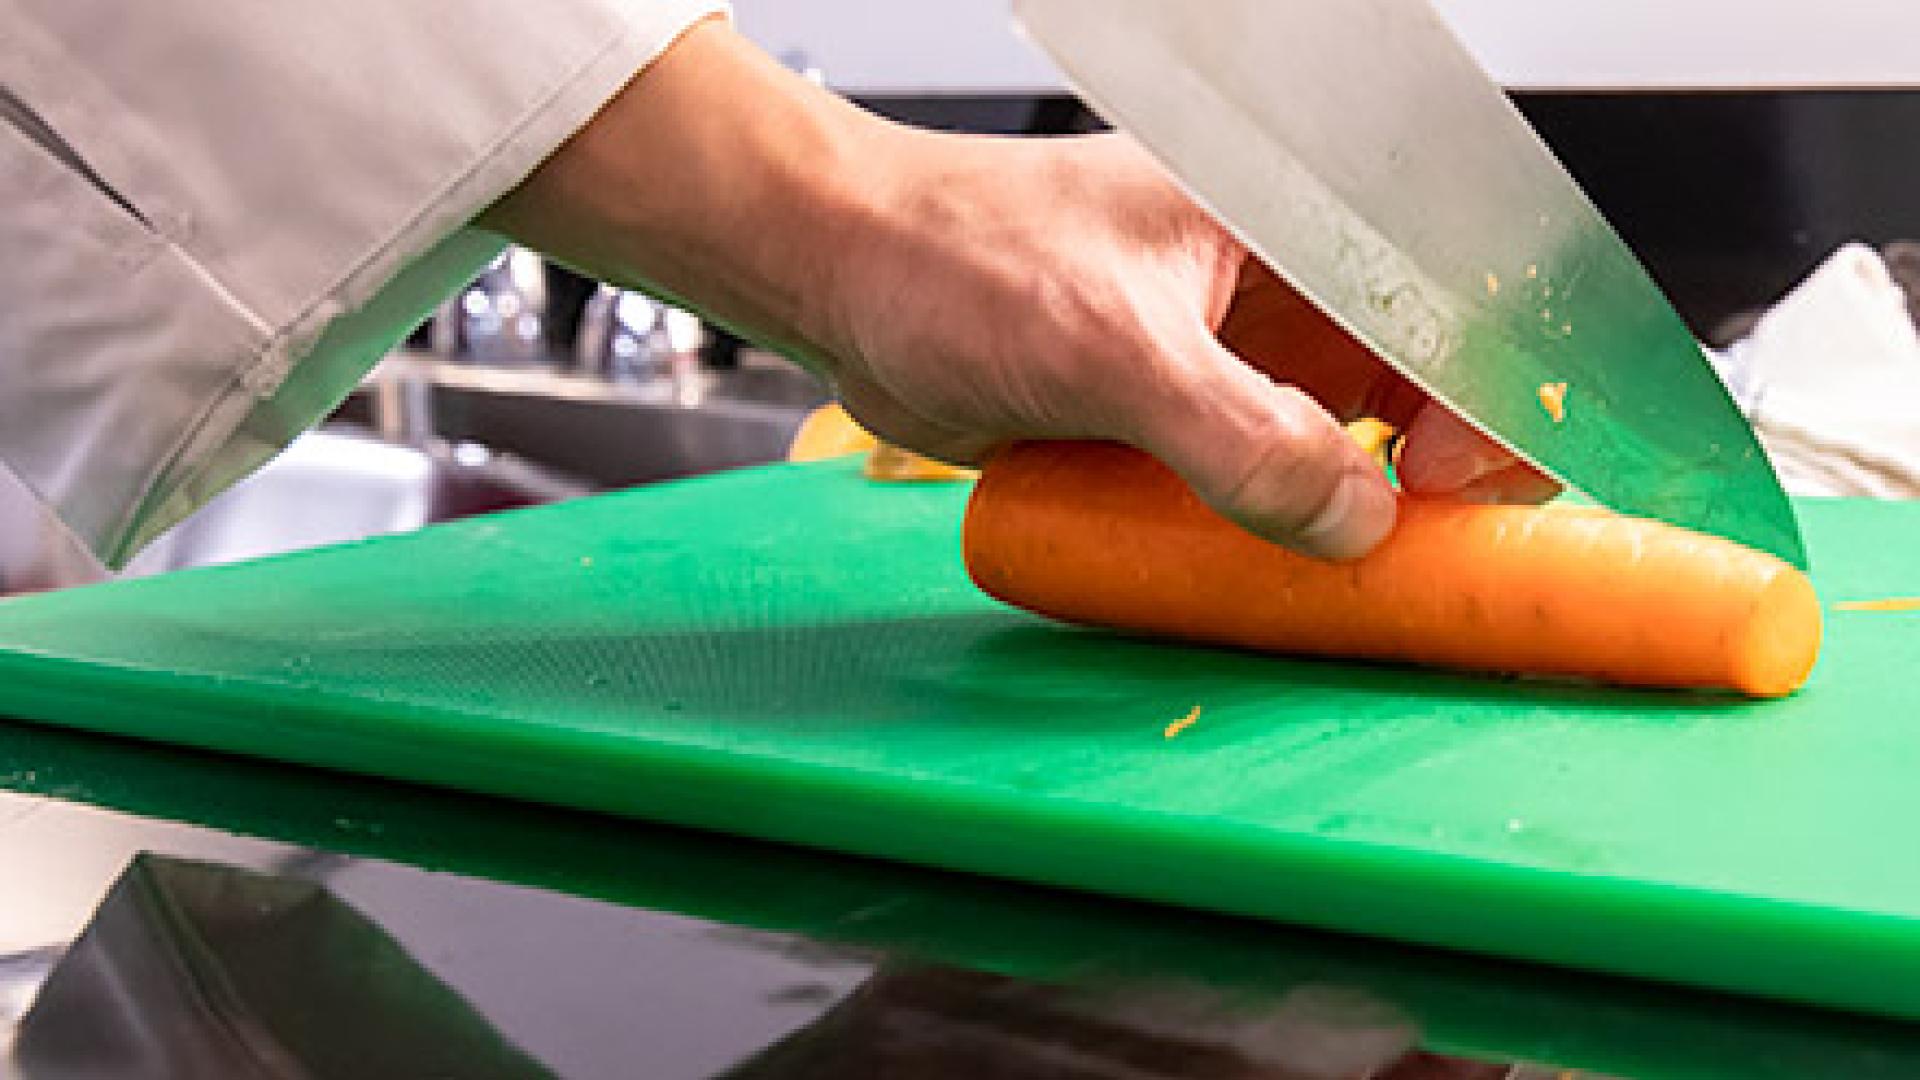 Cutting board with carrot